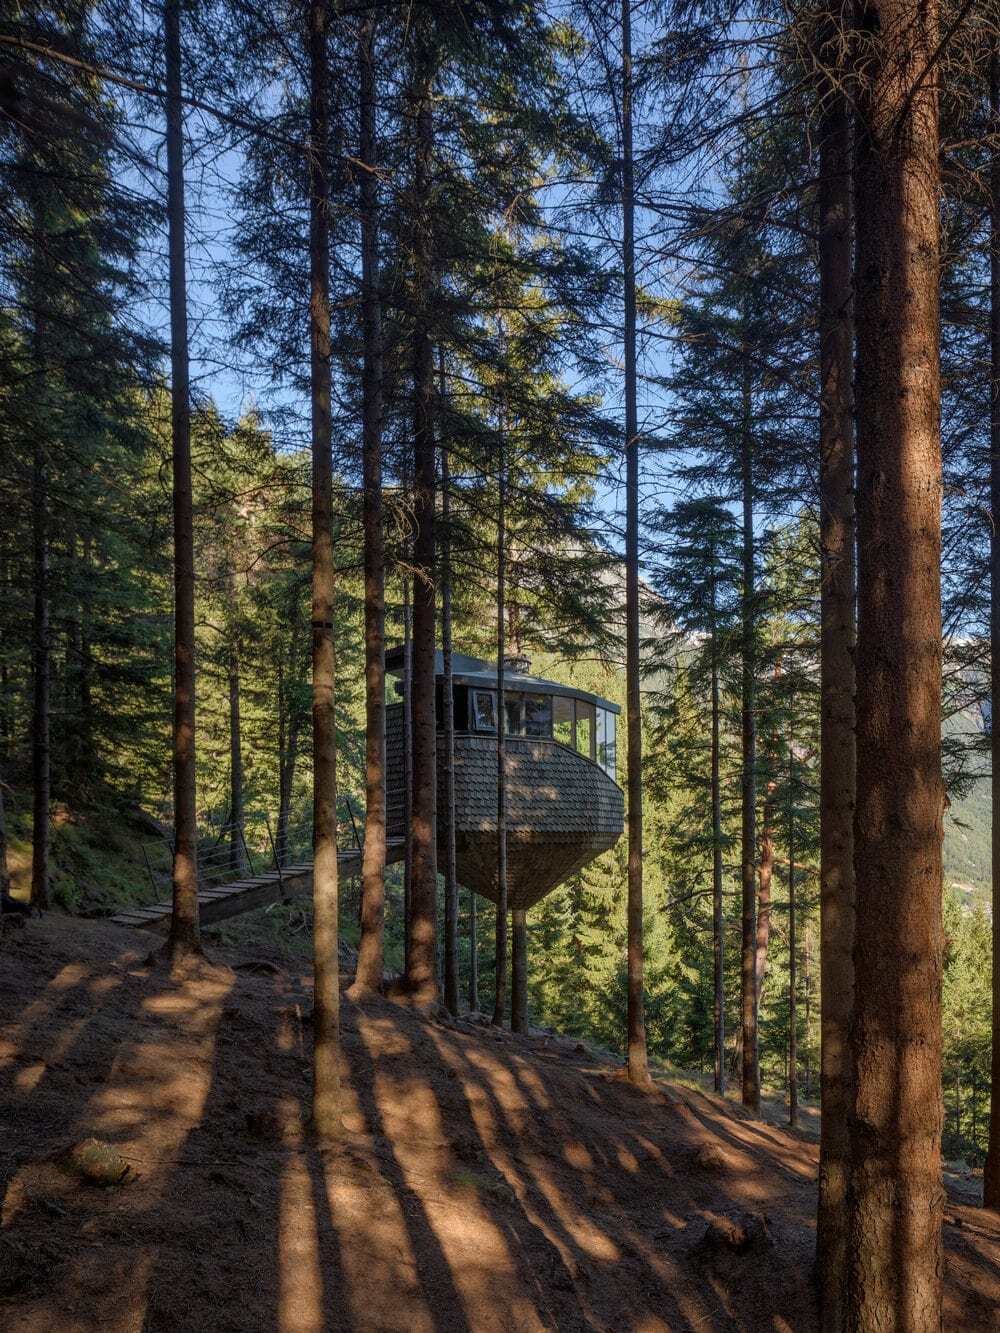 Woodnest Treehouses by Helen & Hard